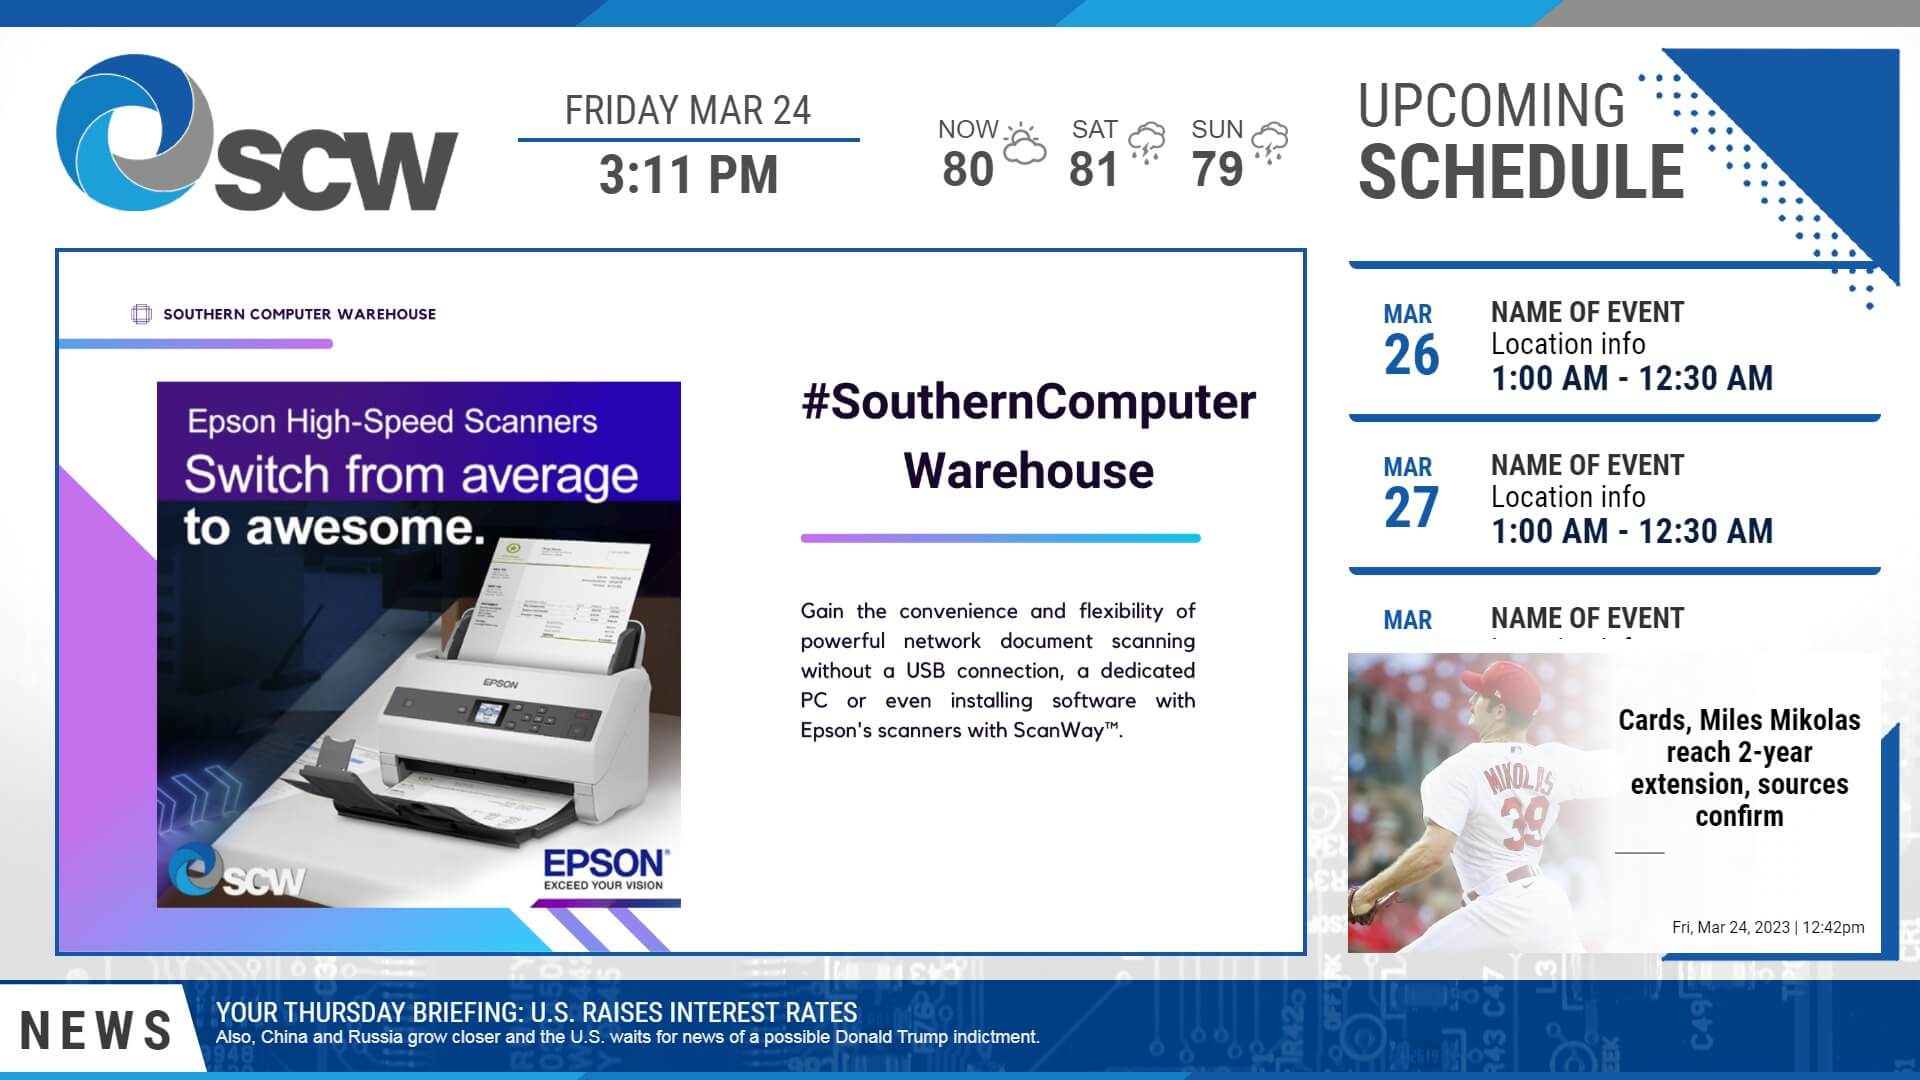 White and blue corporate digital signage showing company tips, news, and upcoming schedule for SCW